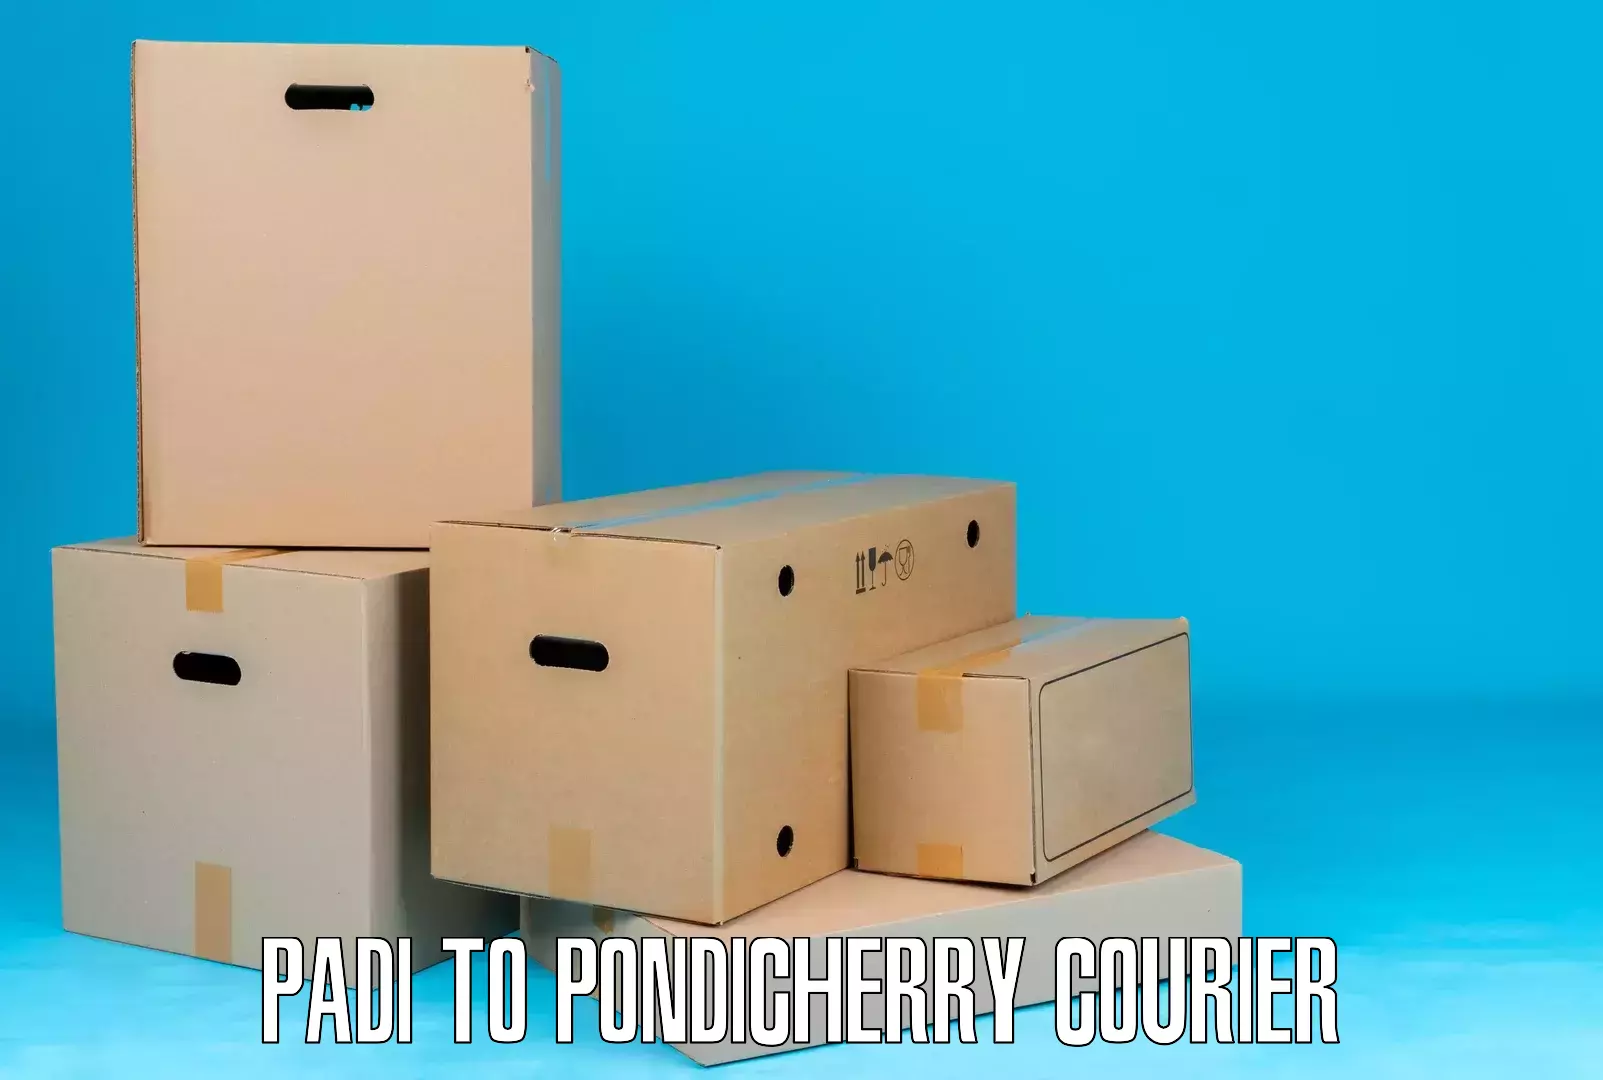 Efficient courier operations Padi to Pondicherry